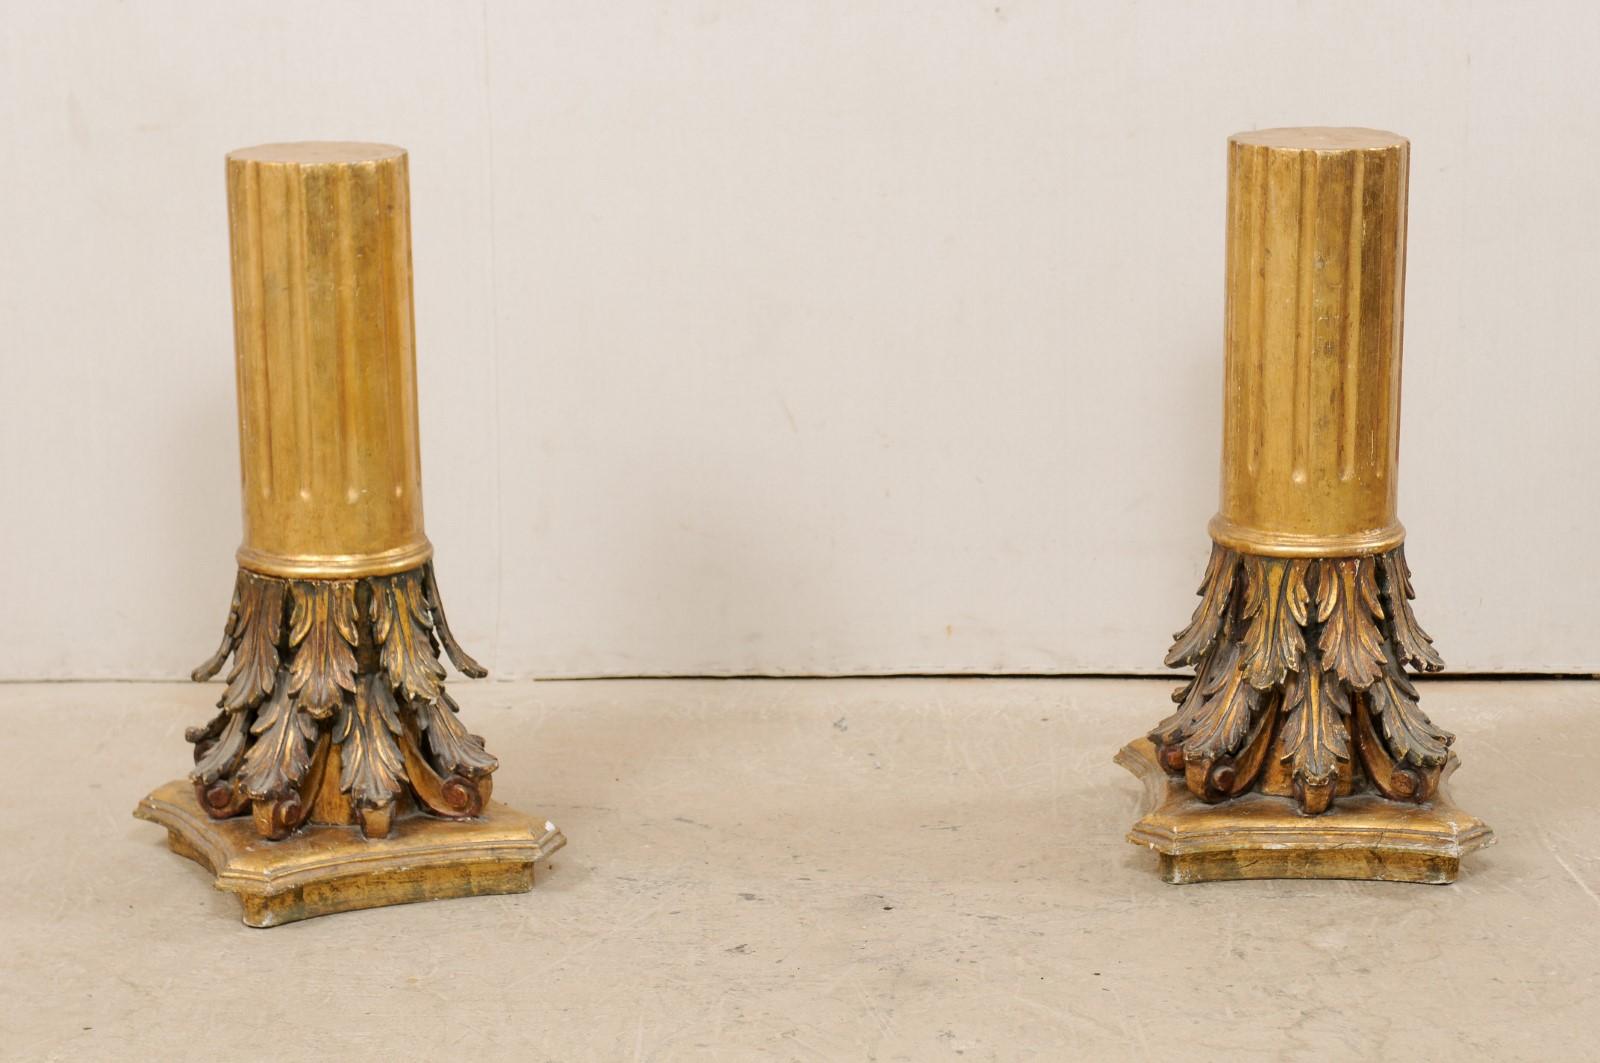 An Italian pair of carved and giltwood three feet tall pedestals from the early 20th century. This antique pair of architectural pedestal columns from Italy, standing approximately three feet in height, are gesso and gilt over wood. The round-shaped